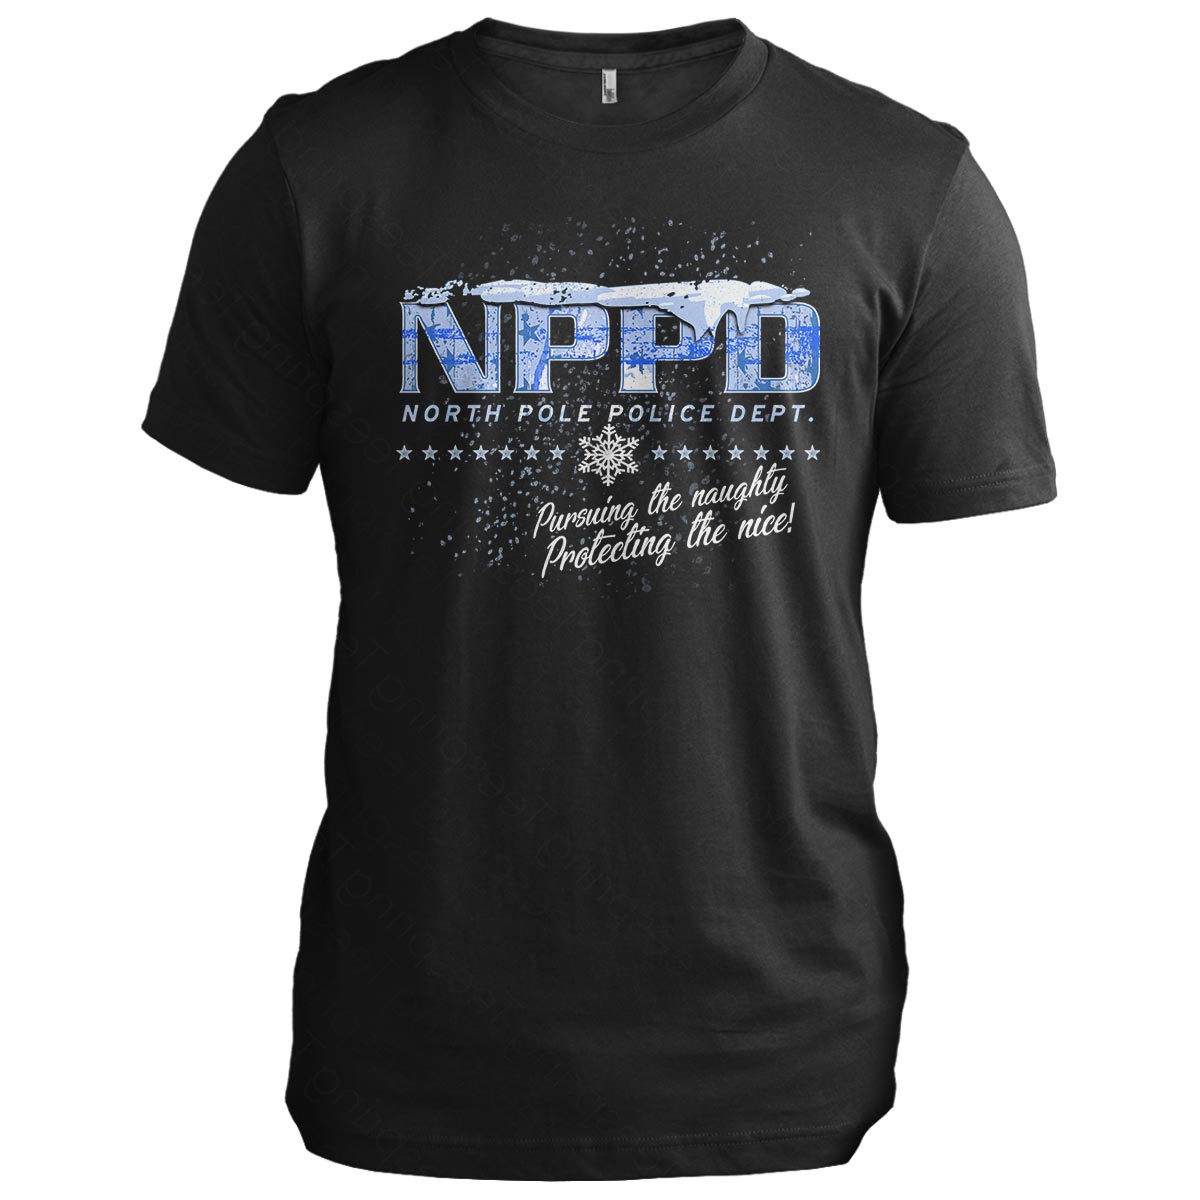 NPPD: North Pole Police Department